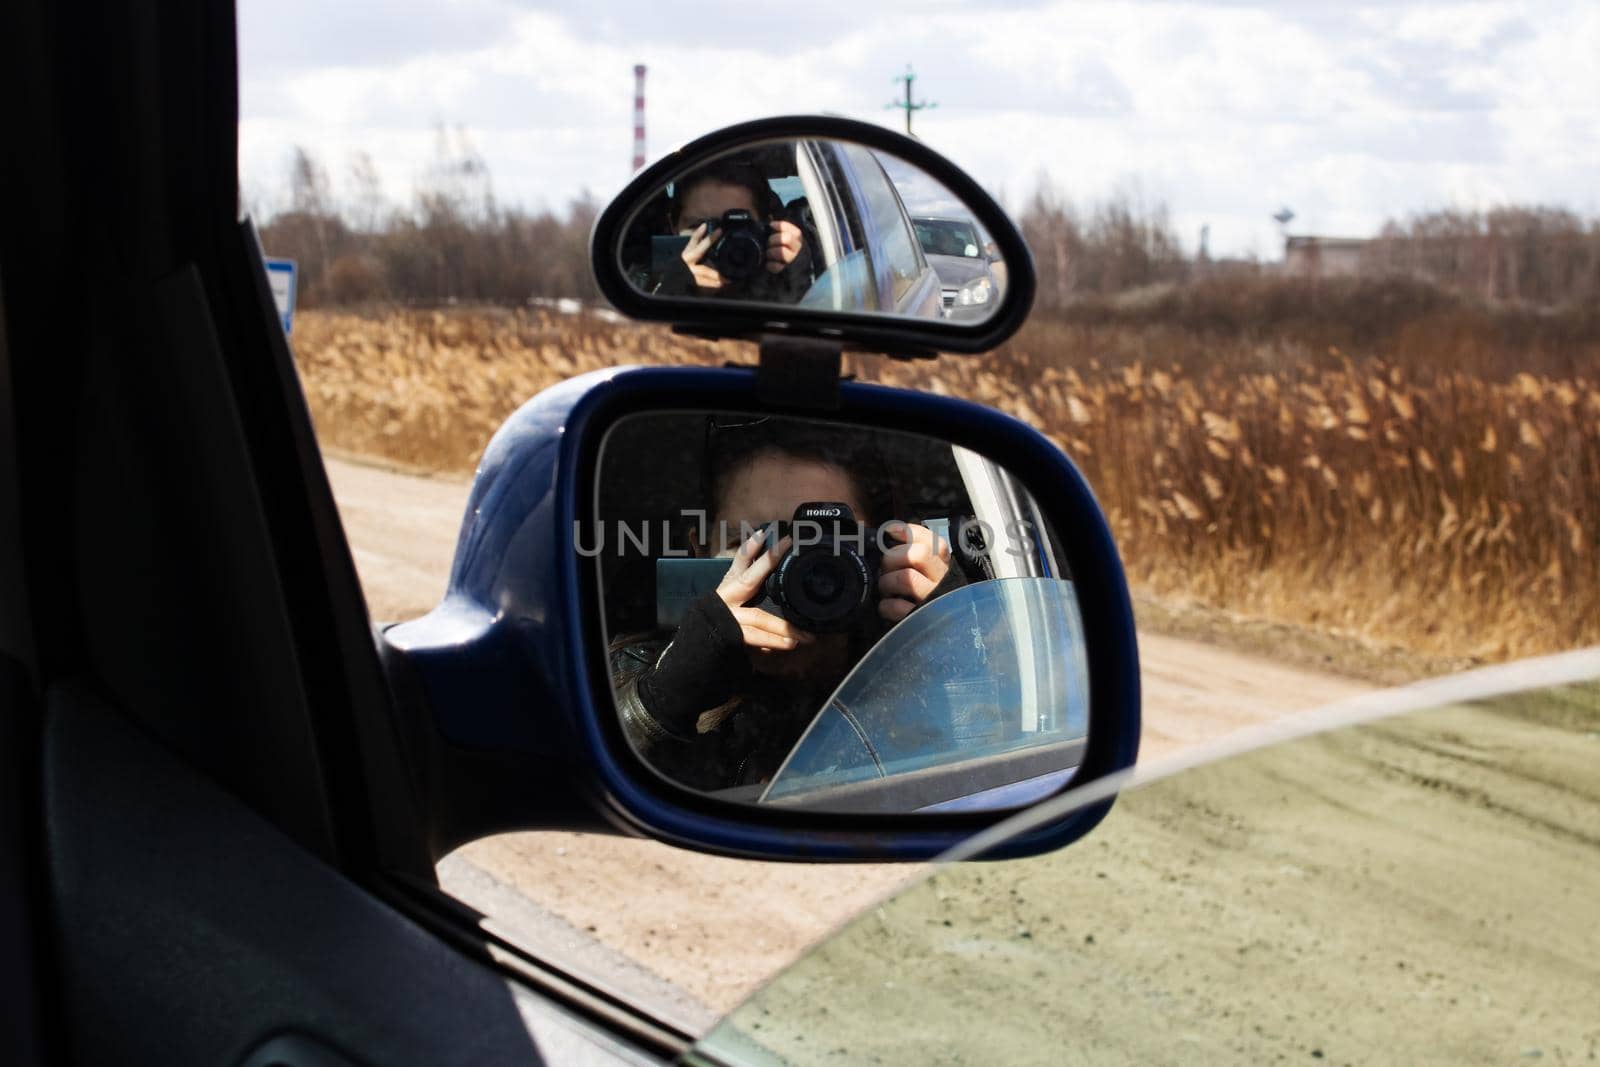 Belarus, Polotsk - 10 april, 2022: Reflection of camera in side mirror of the car by Vera1703